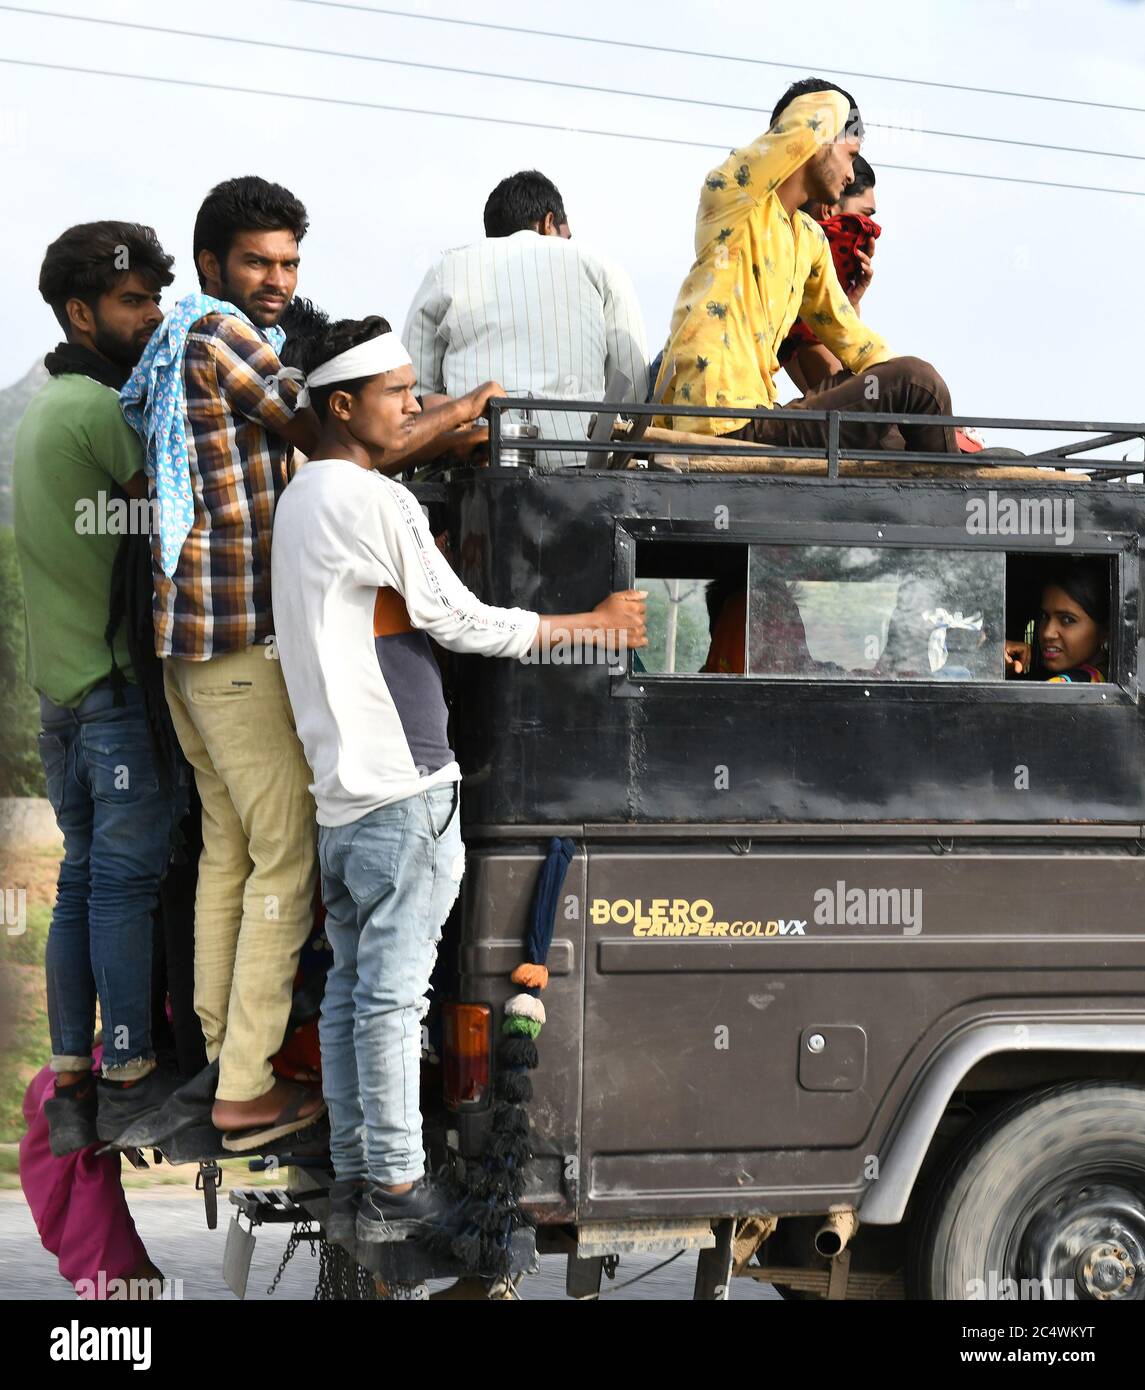 Beawar, Rajasthan, India, June 29, 2020: People travel in an overloaded private taxi on national highway 8 during Unlock 1.0 in Beawar. Drivers are putting the life of passengers to risk by overloading vehicles due to not running regular government bus. Credit: Sumit Saraswat/Alamy Live News Stock Photo